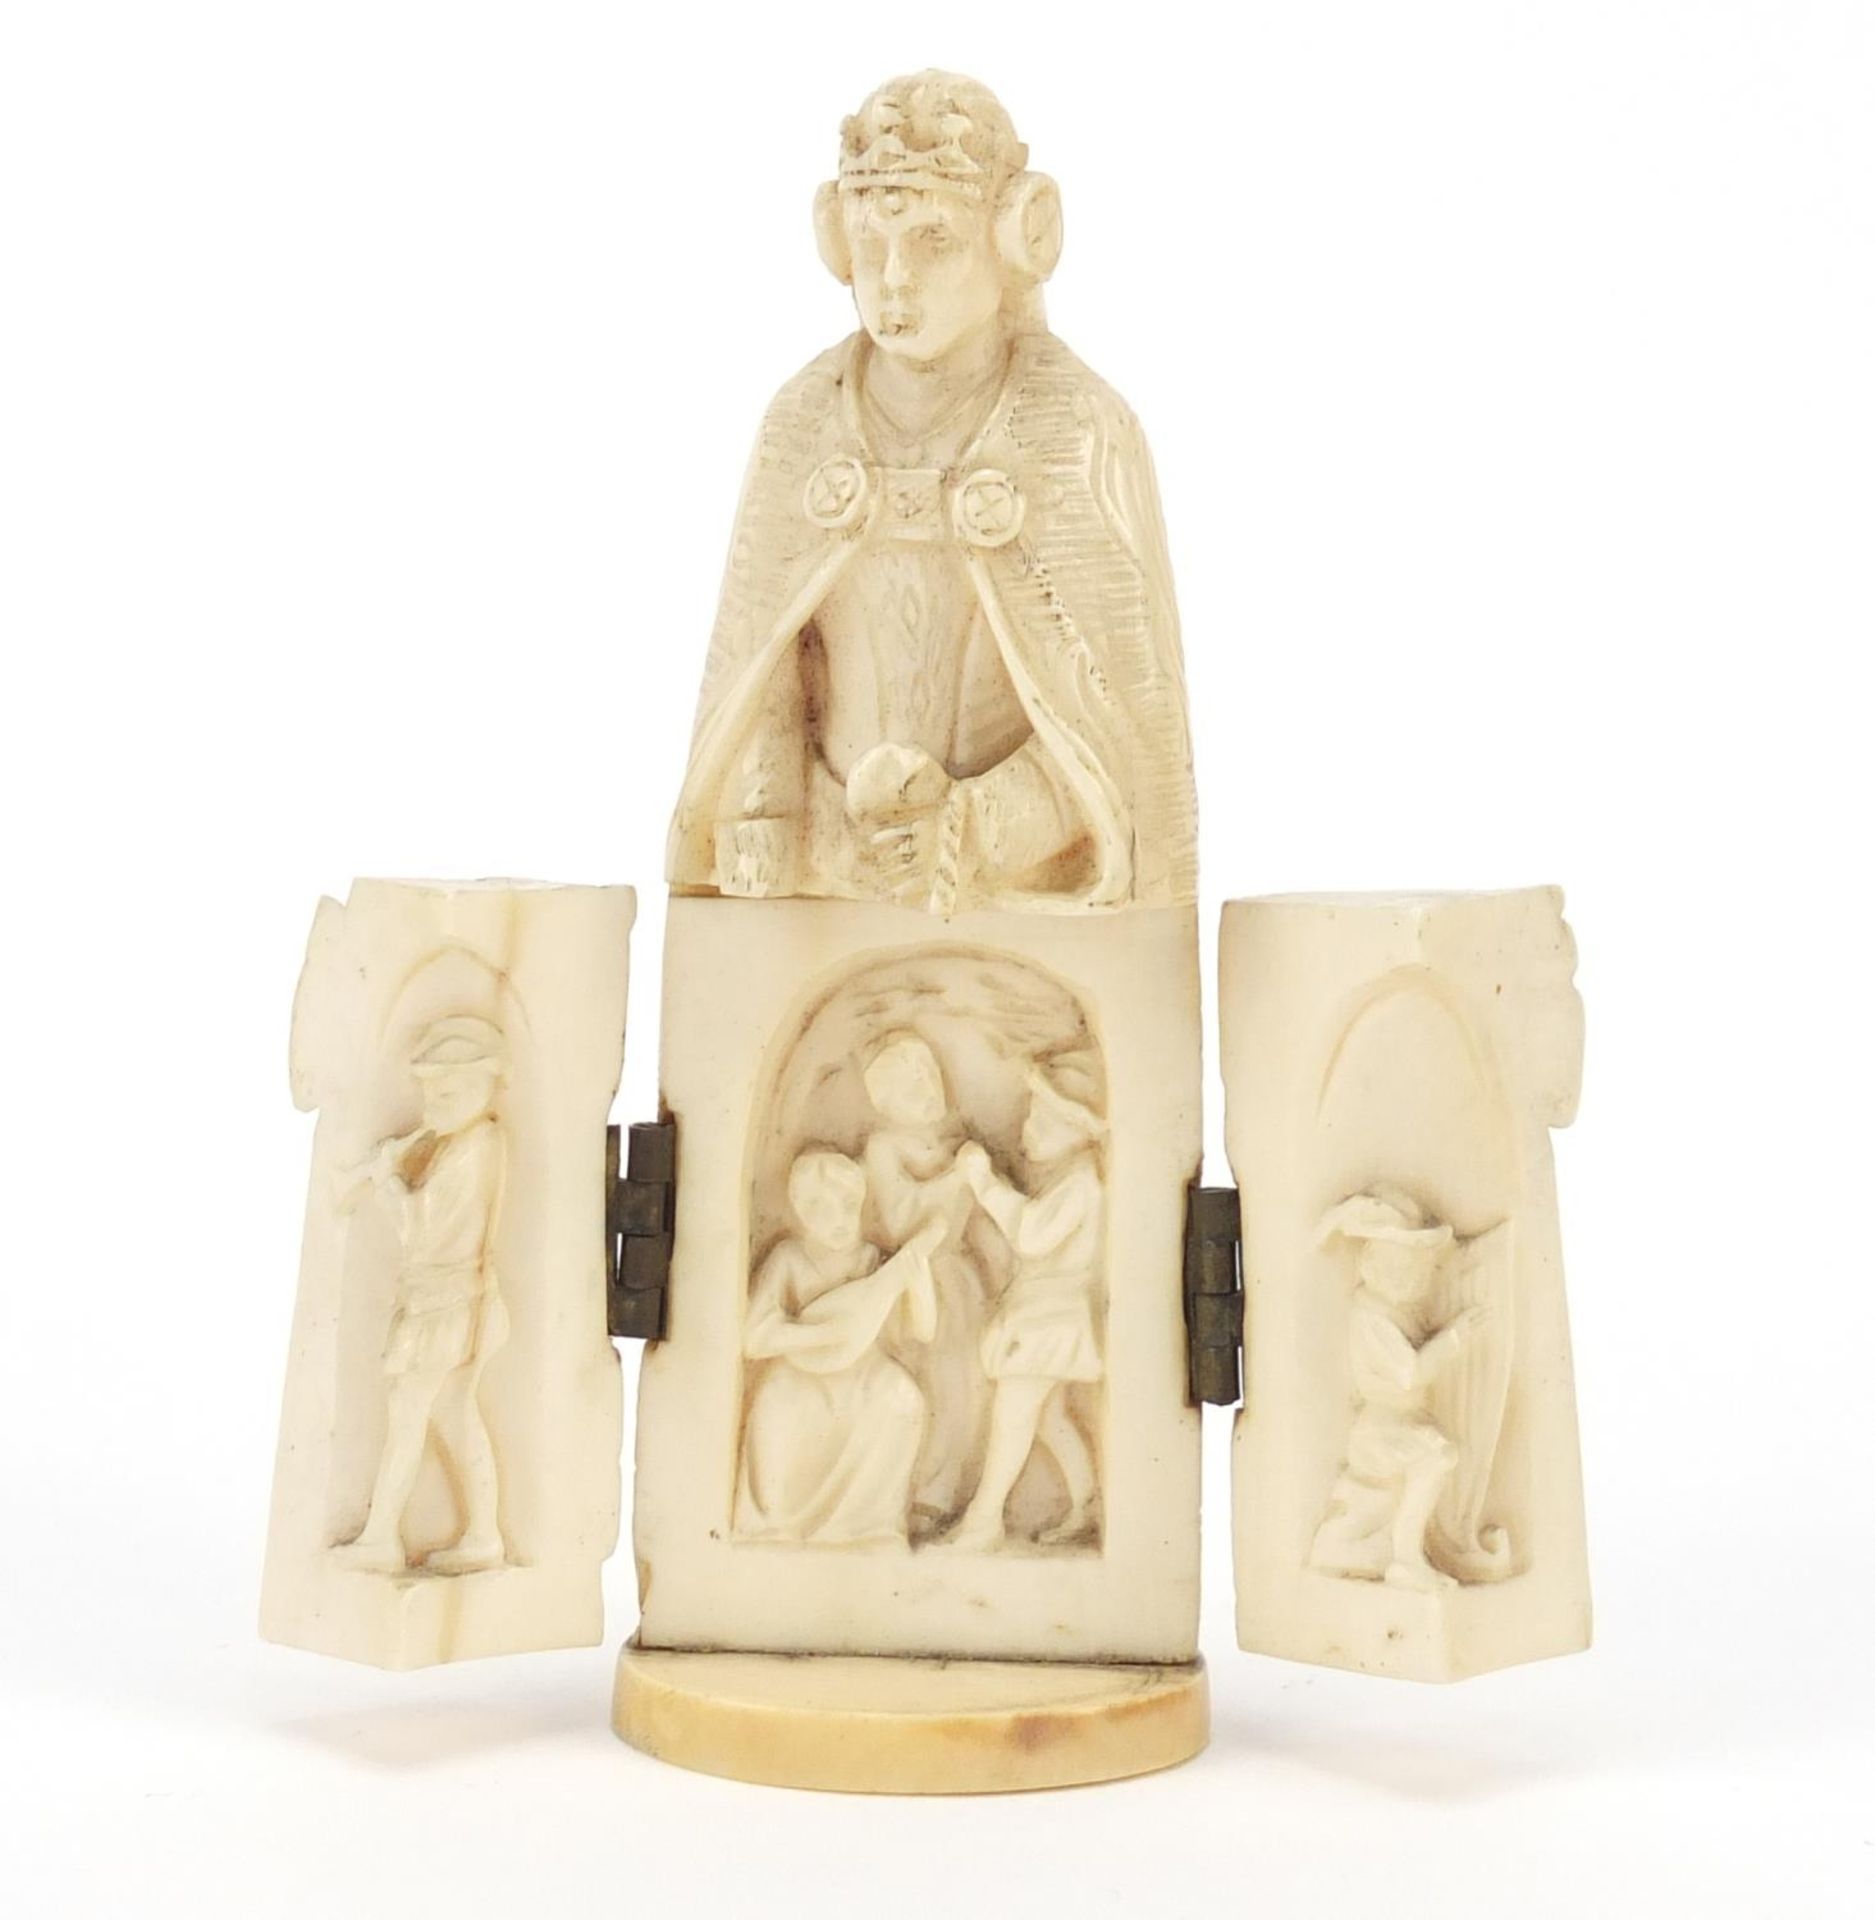 19th century French Dieppe carved ivory tryptych figure, 8.5cm high